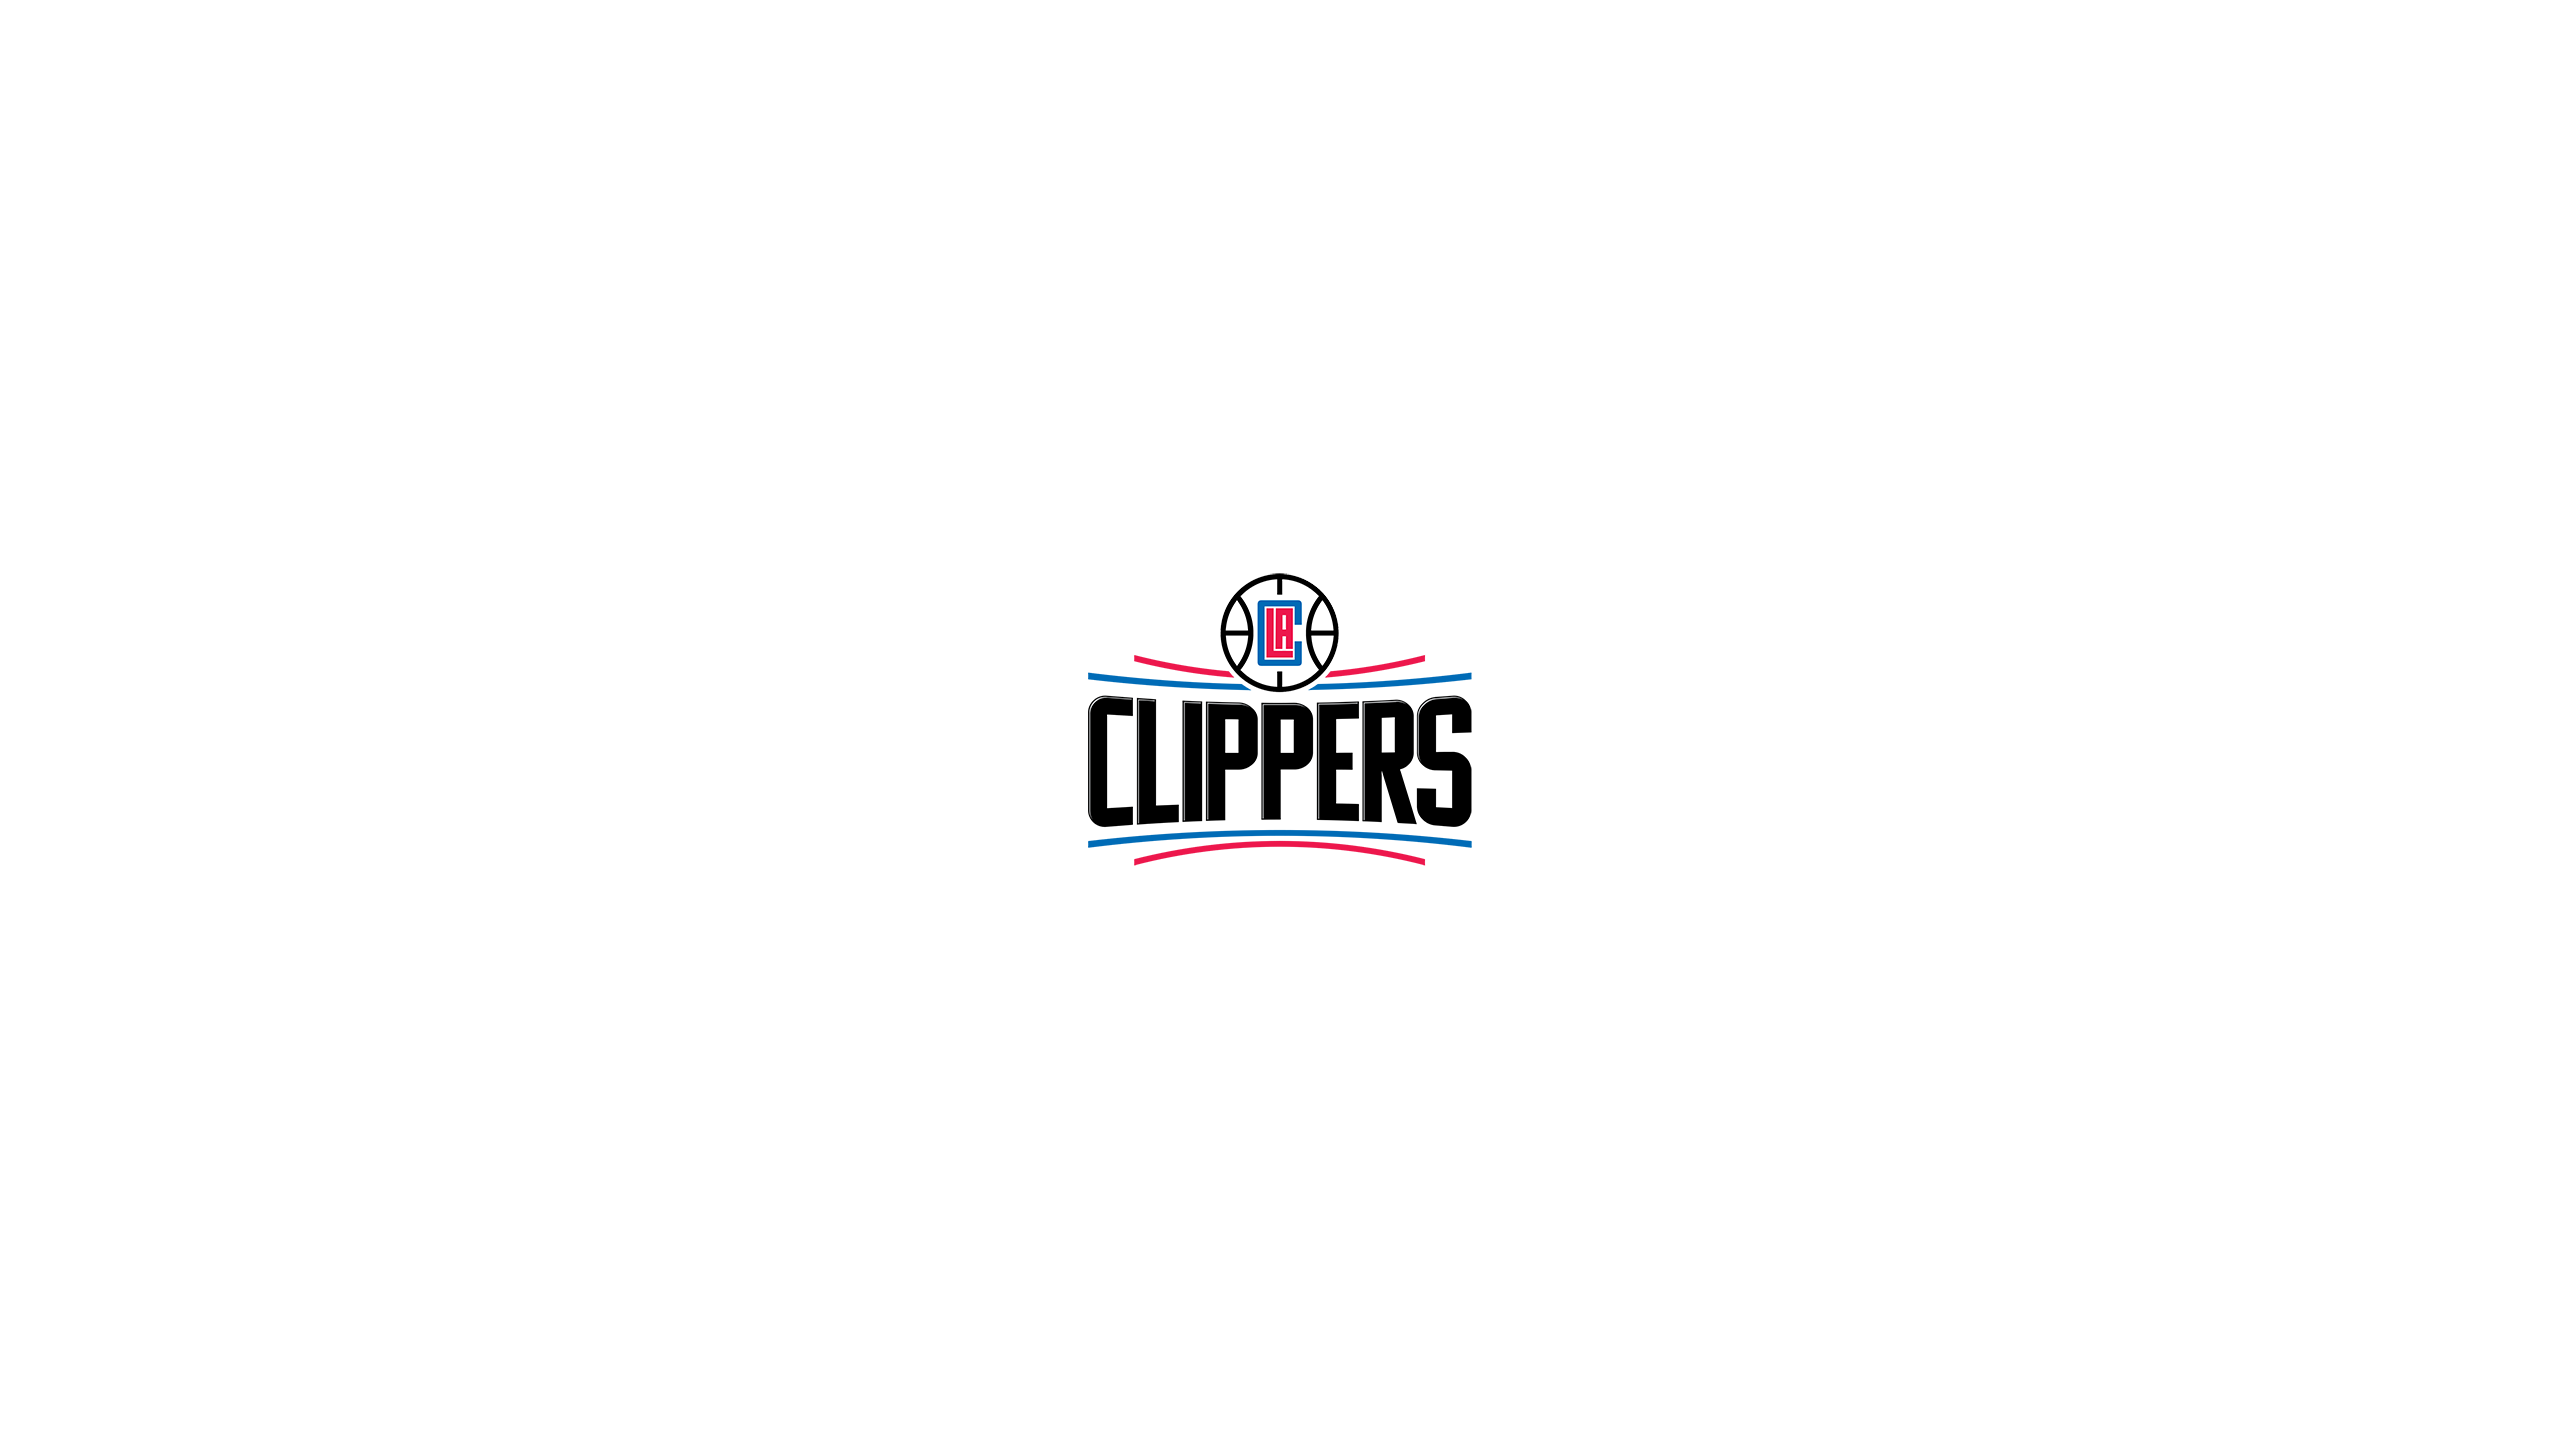 NBA Clippers wallpaper by wmrary - Download on ZEDGE™